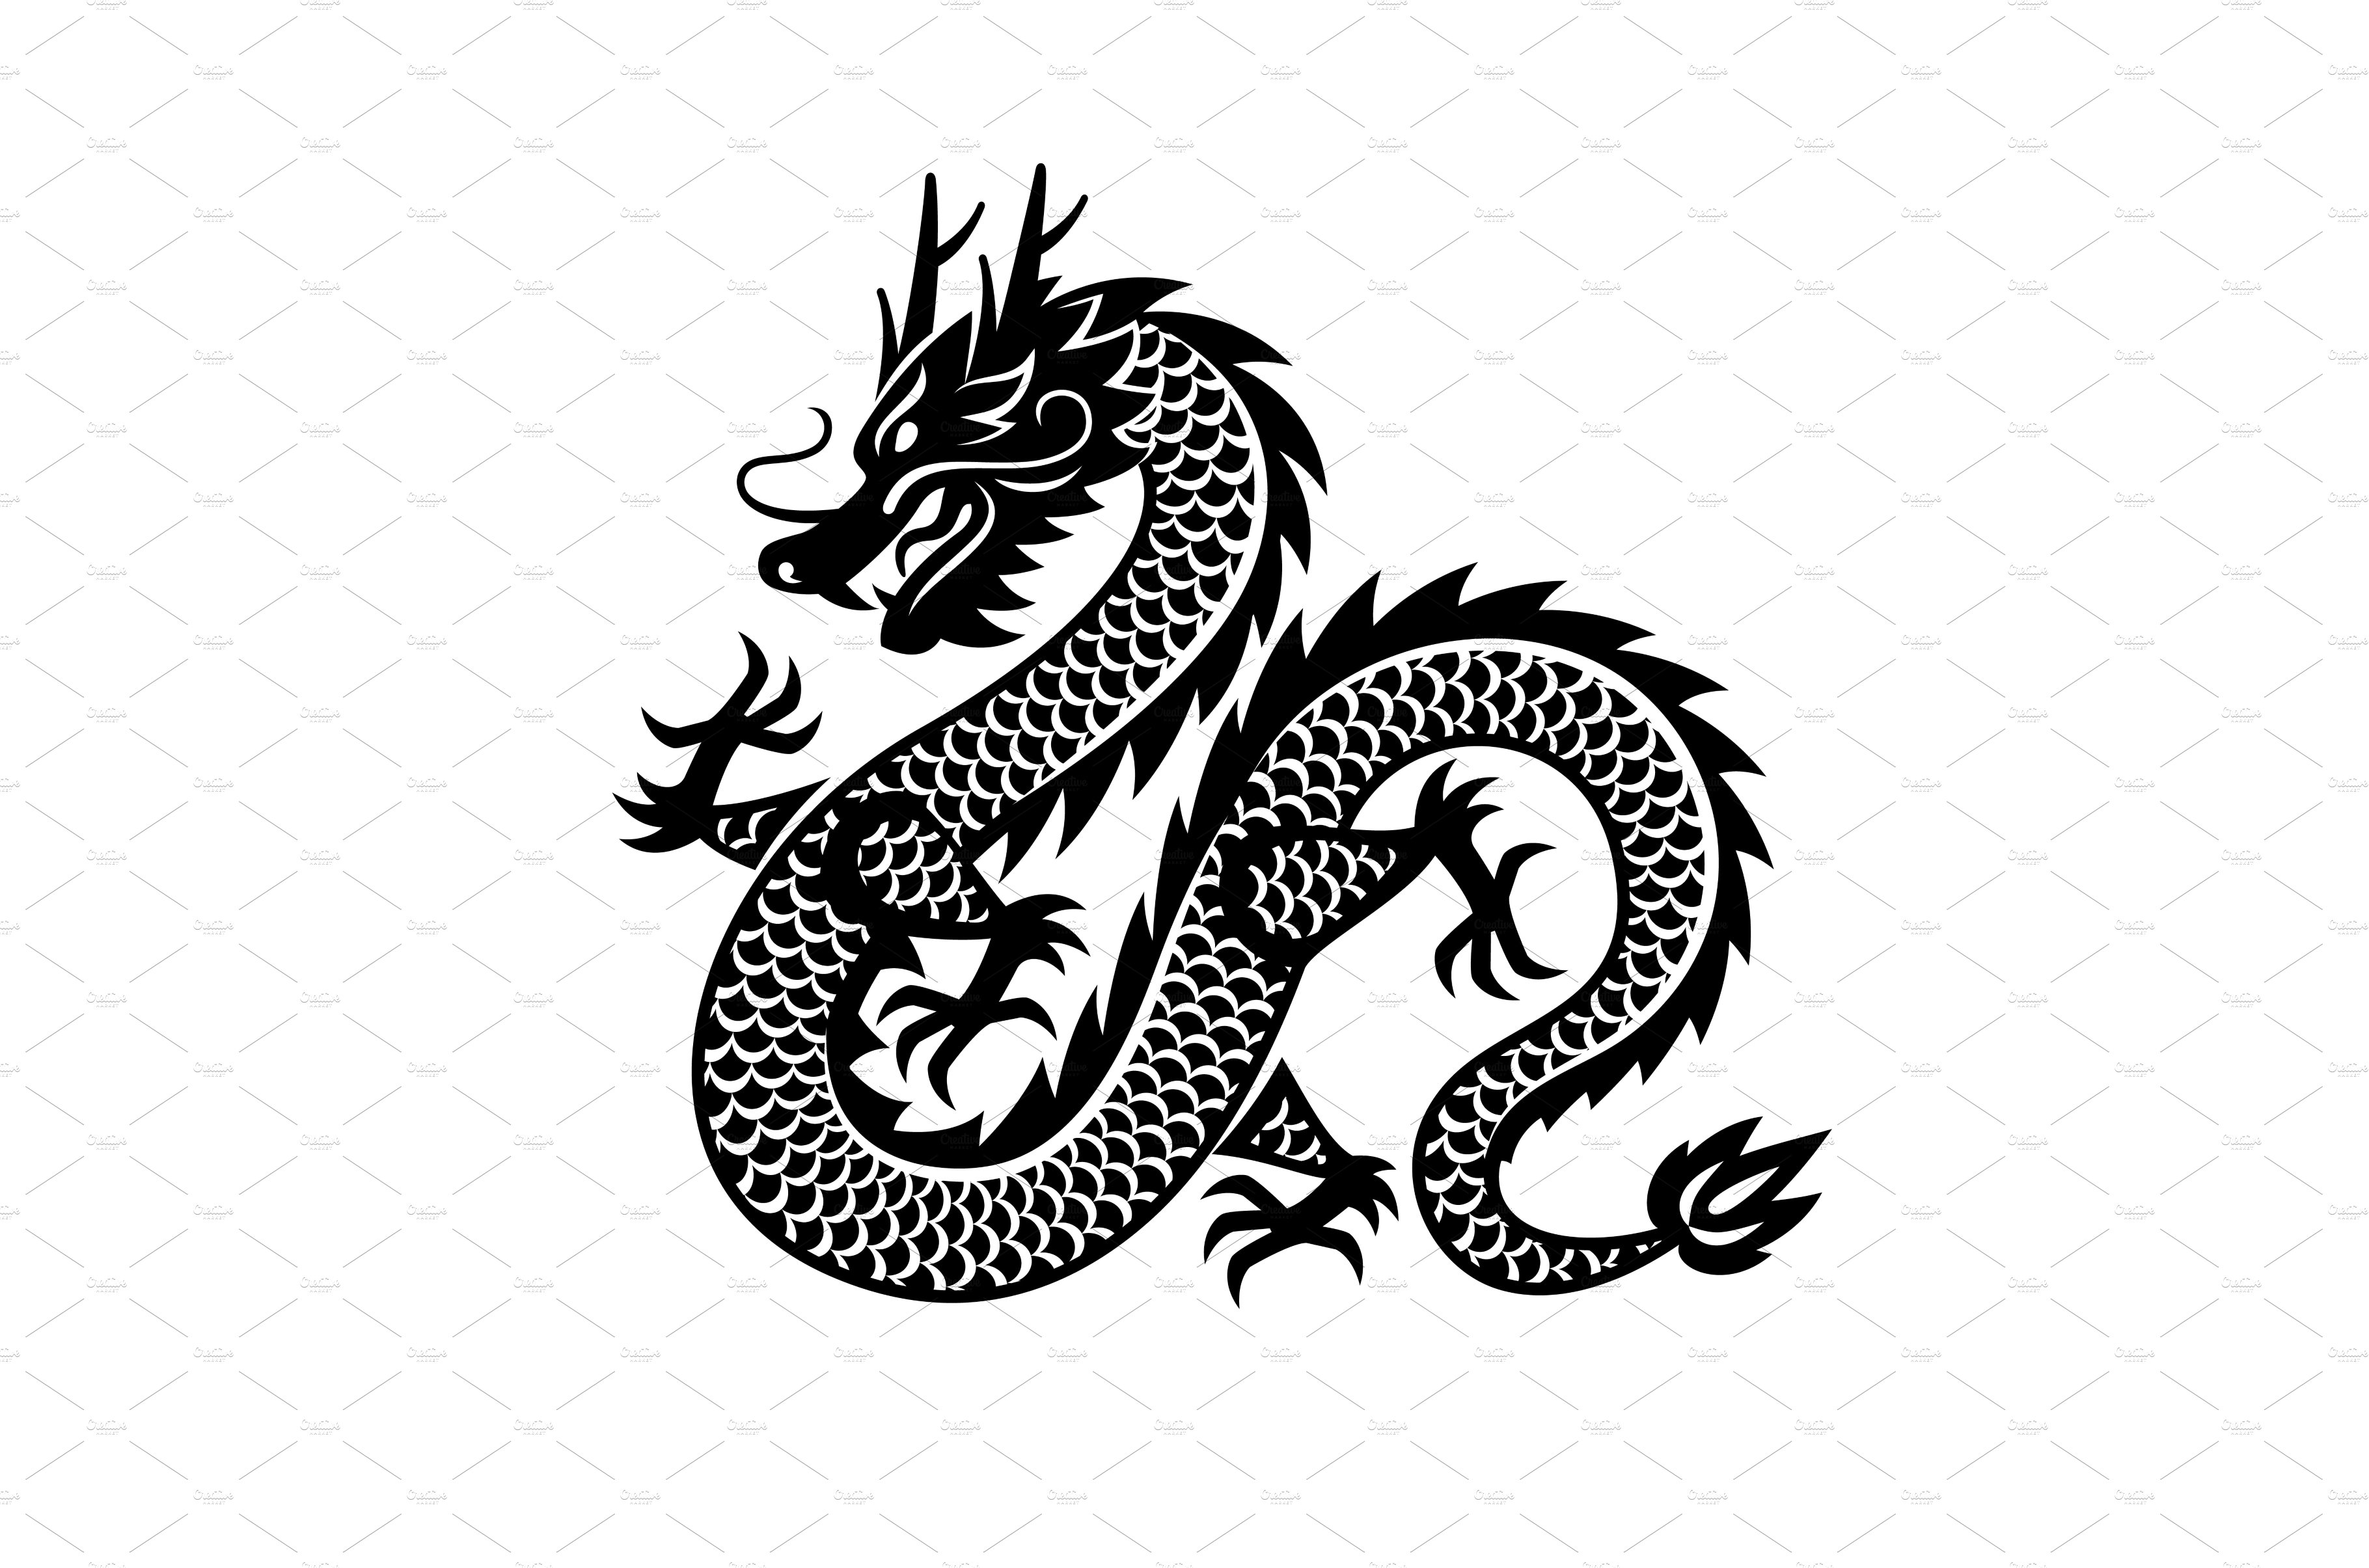 Chinese Dragon black silhouette cover image.